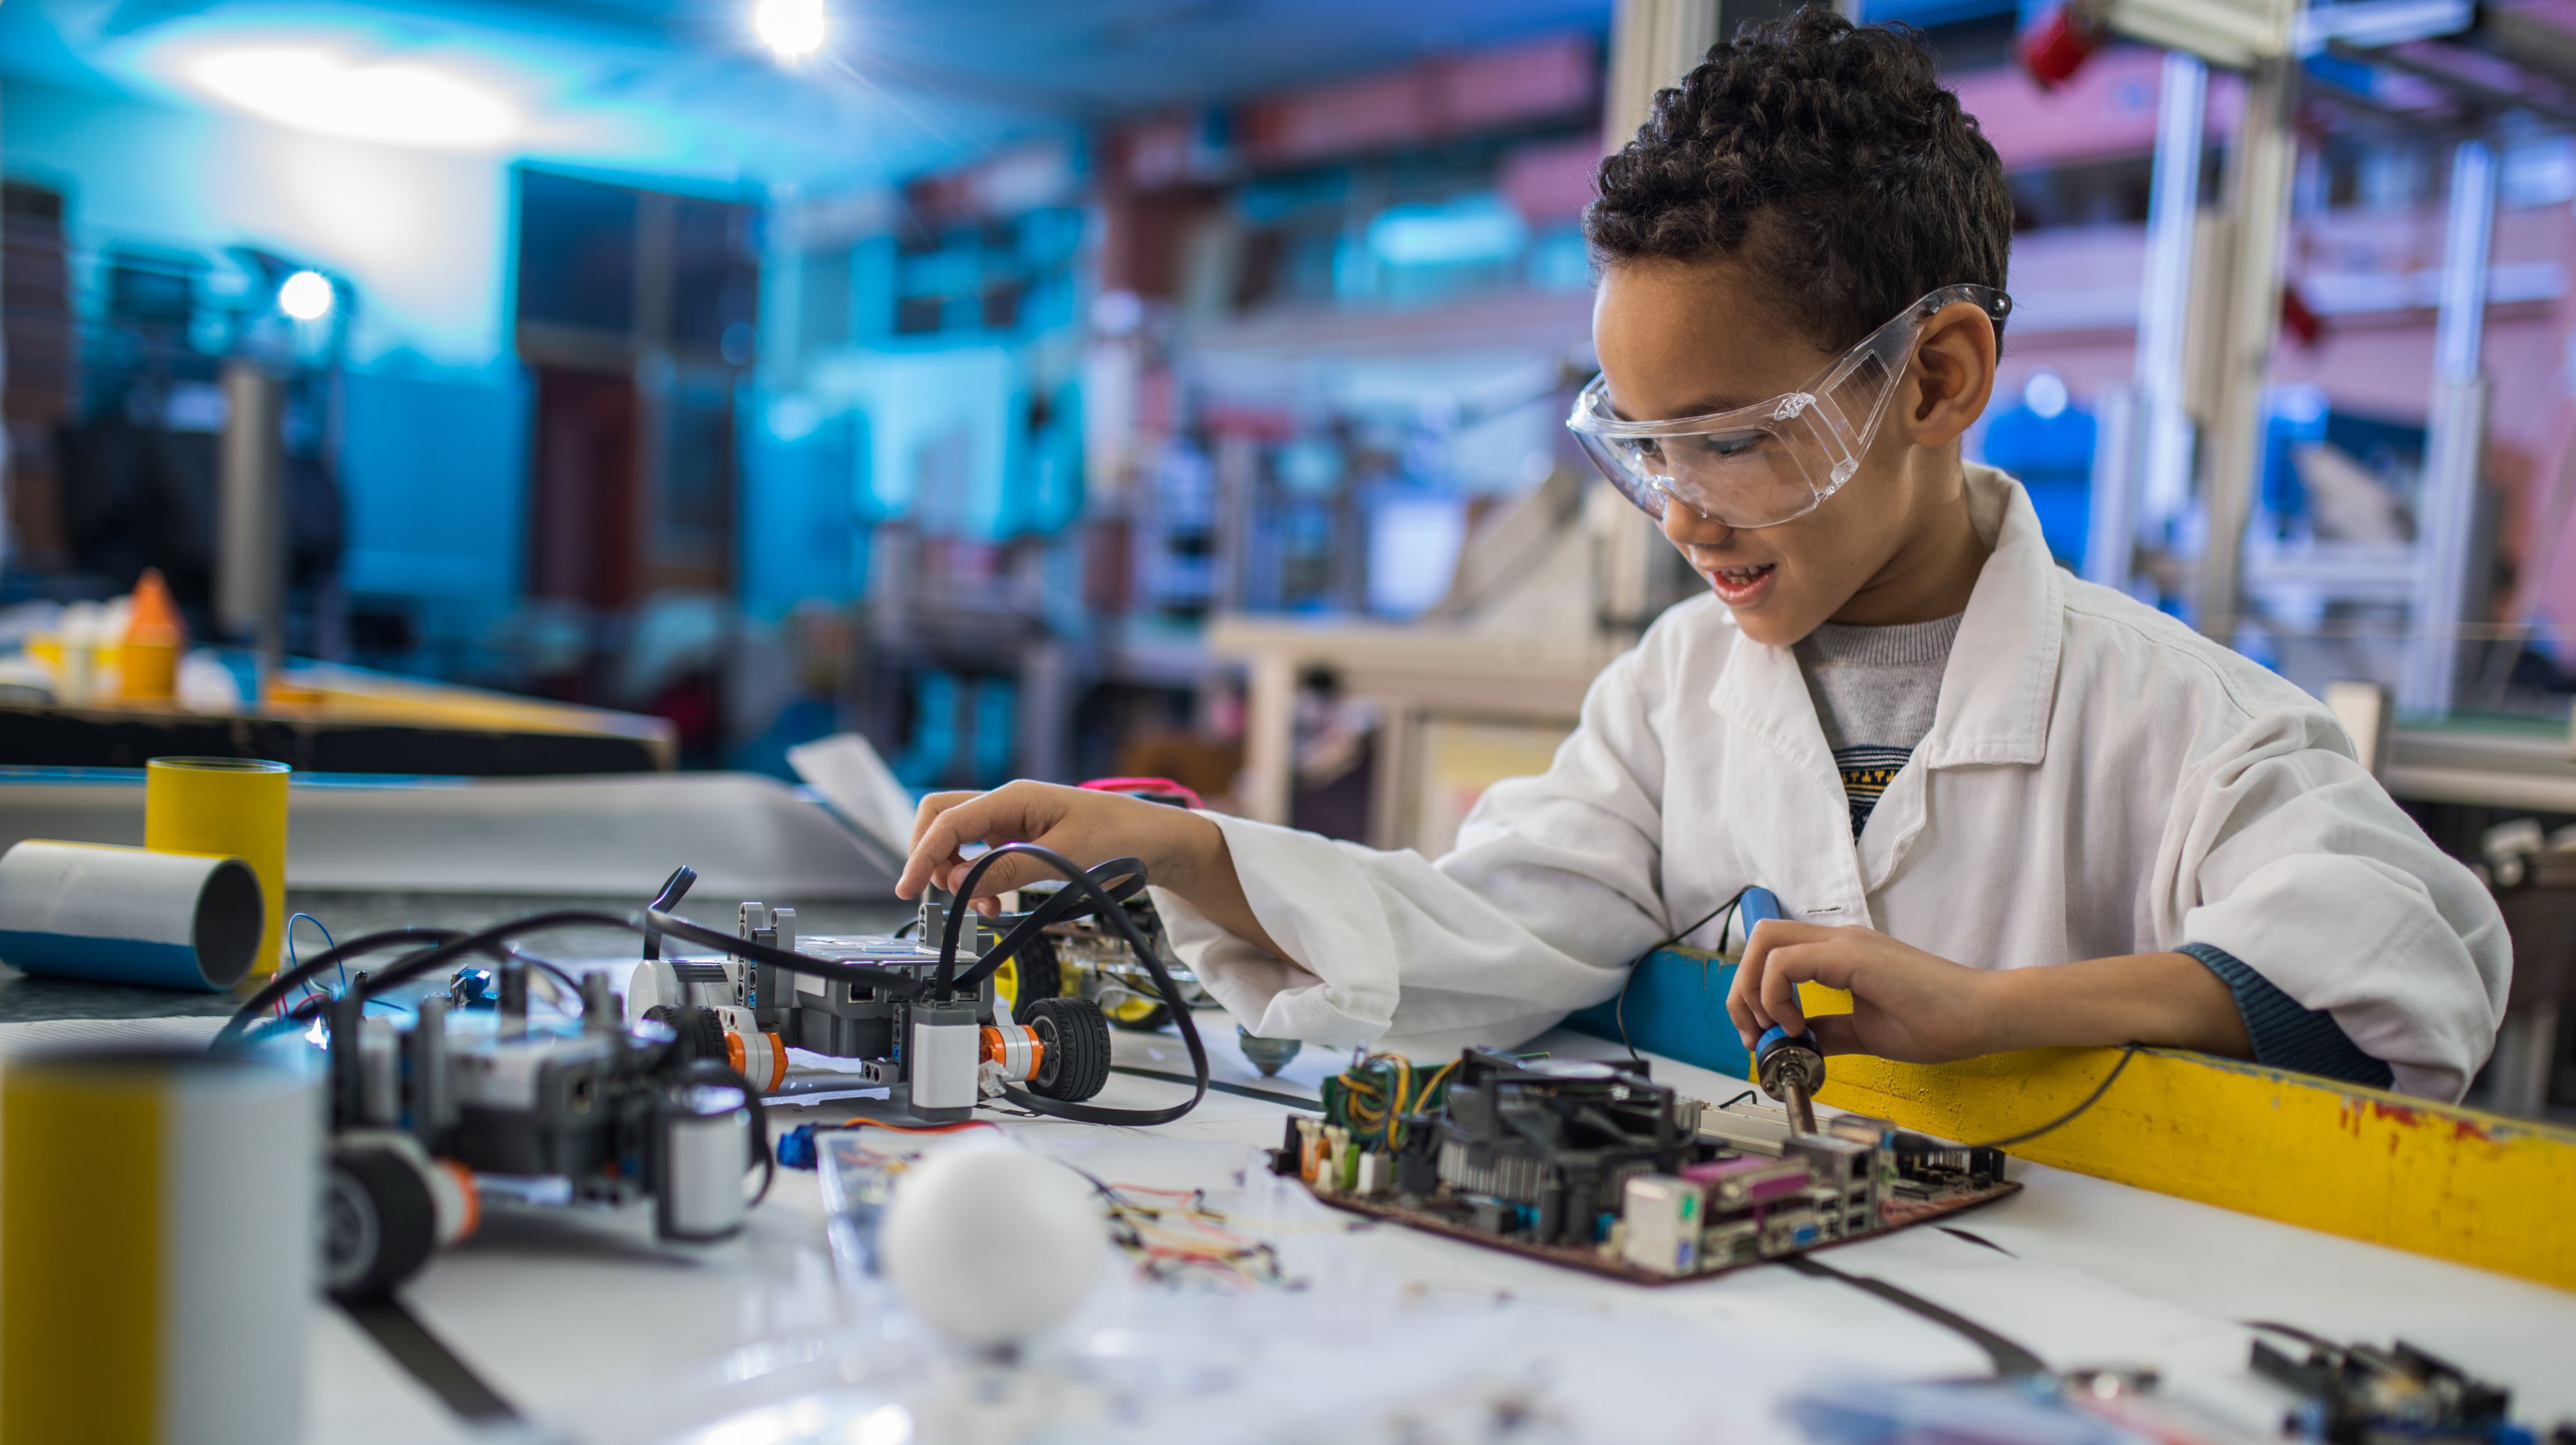 Boy working on a robot in a laboratory. Image: skynesher